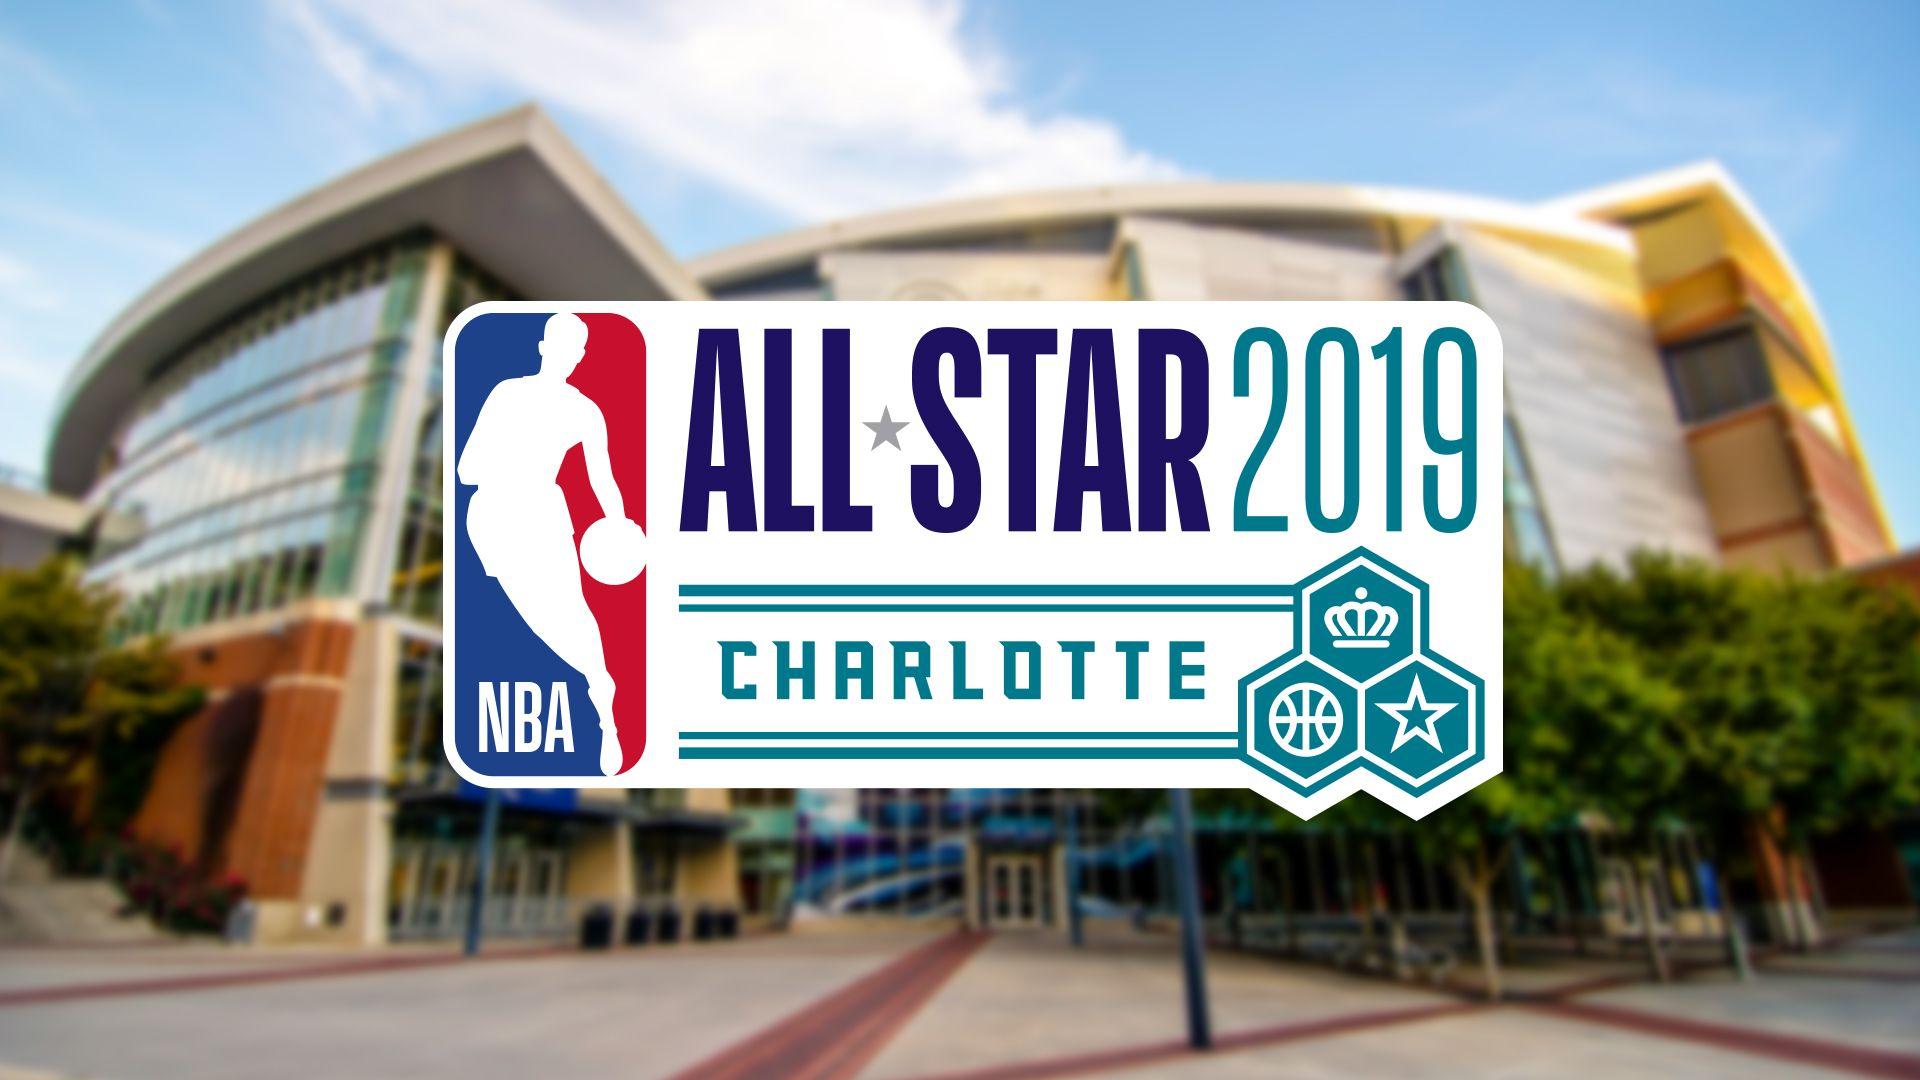 NBA All Star Weekend In Charlotte. Charlotte's Got A Lot